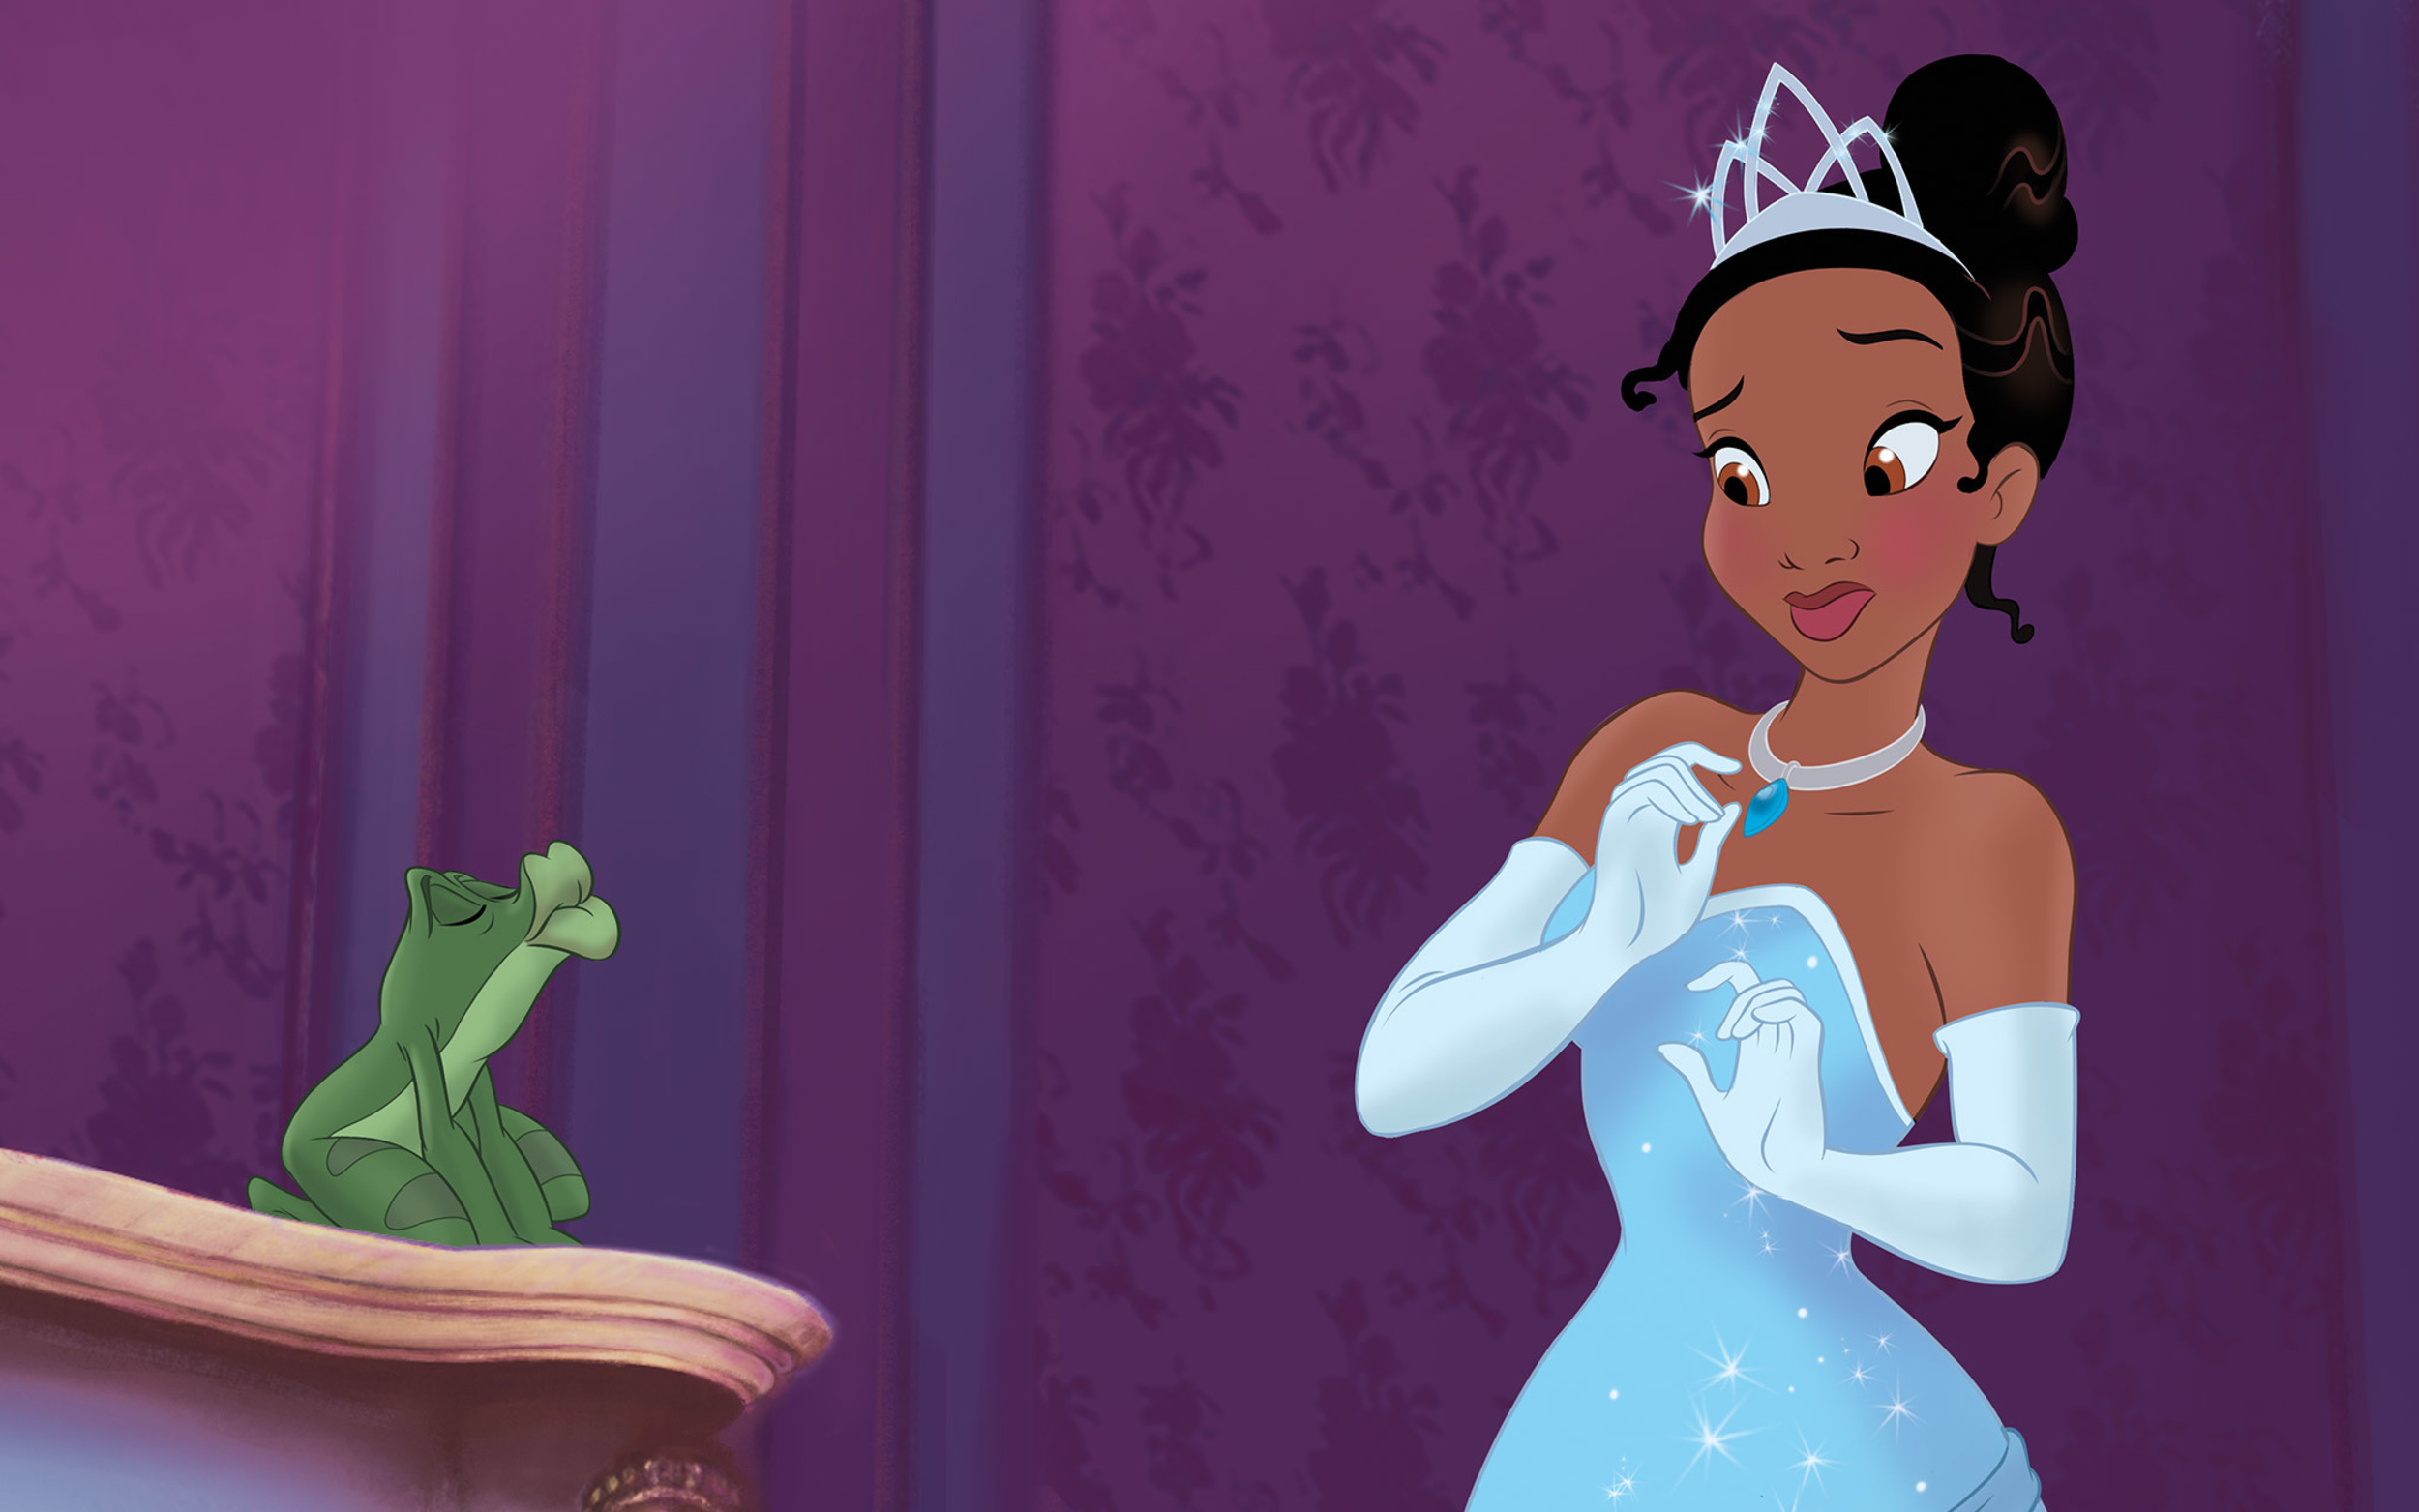 <p>Even though Disney Studios has been churning out movies for decades, none of its feature films offered proper representation to its viewers until this 2009 Oscar-nominated hit. </p><p><em>The Princess and the Frog</em> was the first of Disney's animated features to include a person of color as its lead character. It also updated the classic story of "The Frog Princess" to a New Orleans tale that beautifully recreated the iconic town's preserved buildings and signature style and wasn't afraid to take risks by making its lead prince character into an egotistical buffoon who has much growing up to do as other characters. It also paved the way for future roles like Halle Bailey's performance as Ariel in the live-action remake of <em>The Little Mermaid</em>. </p><p><a href='https://www.msn.com/en-us/community/channel/vid-cj9pqbr0vn9in2b6ddcd8sfgpfq6x6utp44fssrv6mc2gtybw0us'>Did you enjoy this slideshow? Follow us on MSN to see more of our exclusive entertainment content.</a></p>